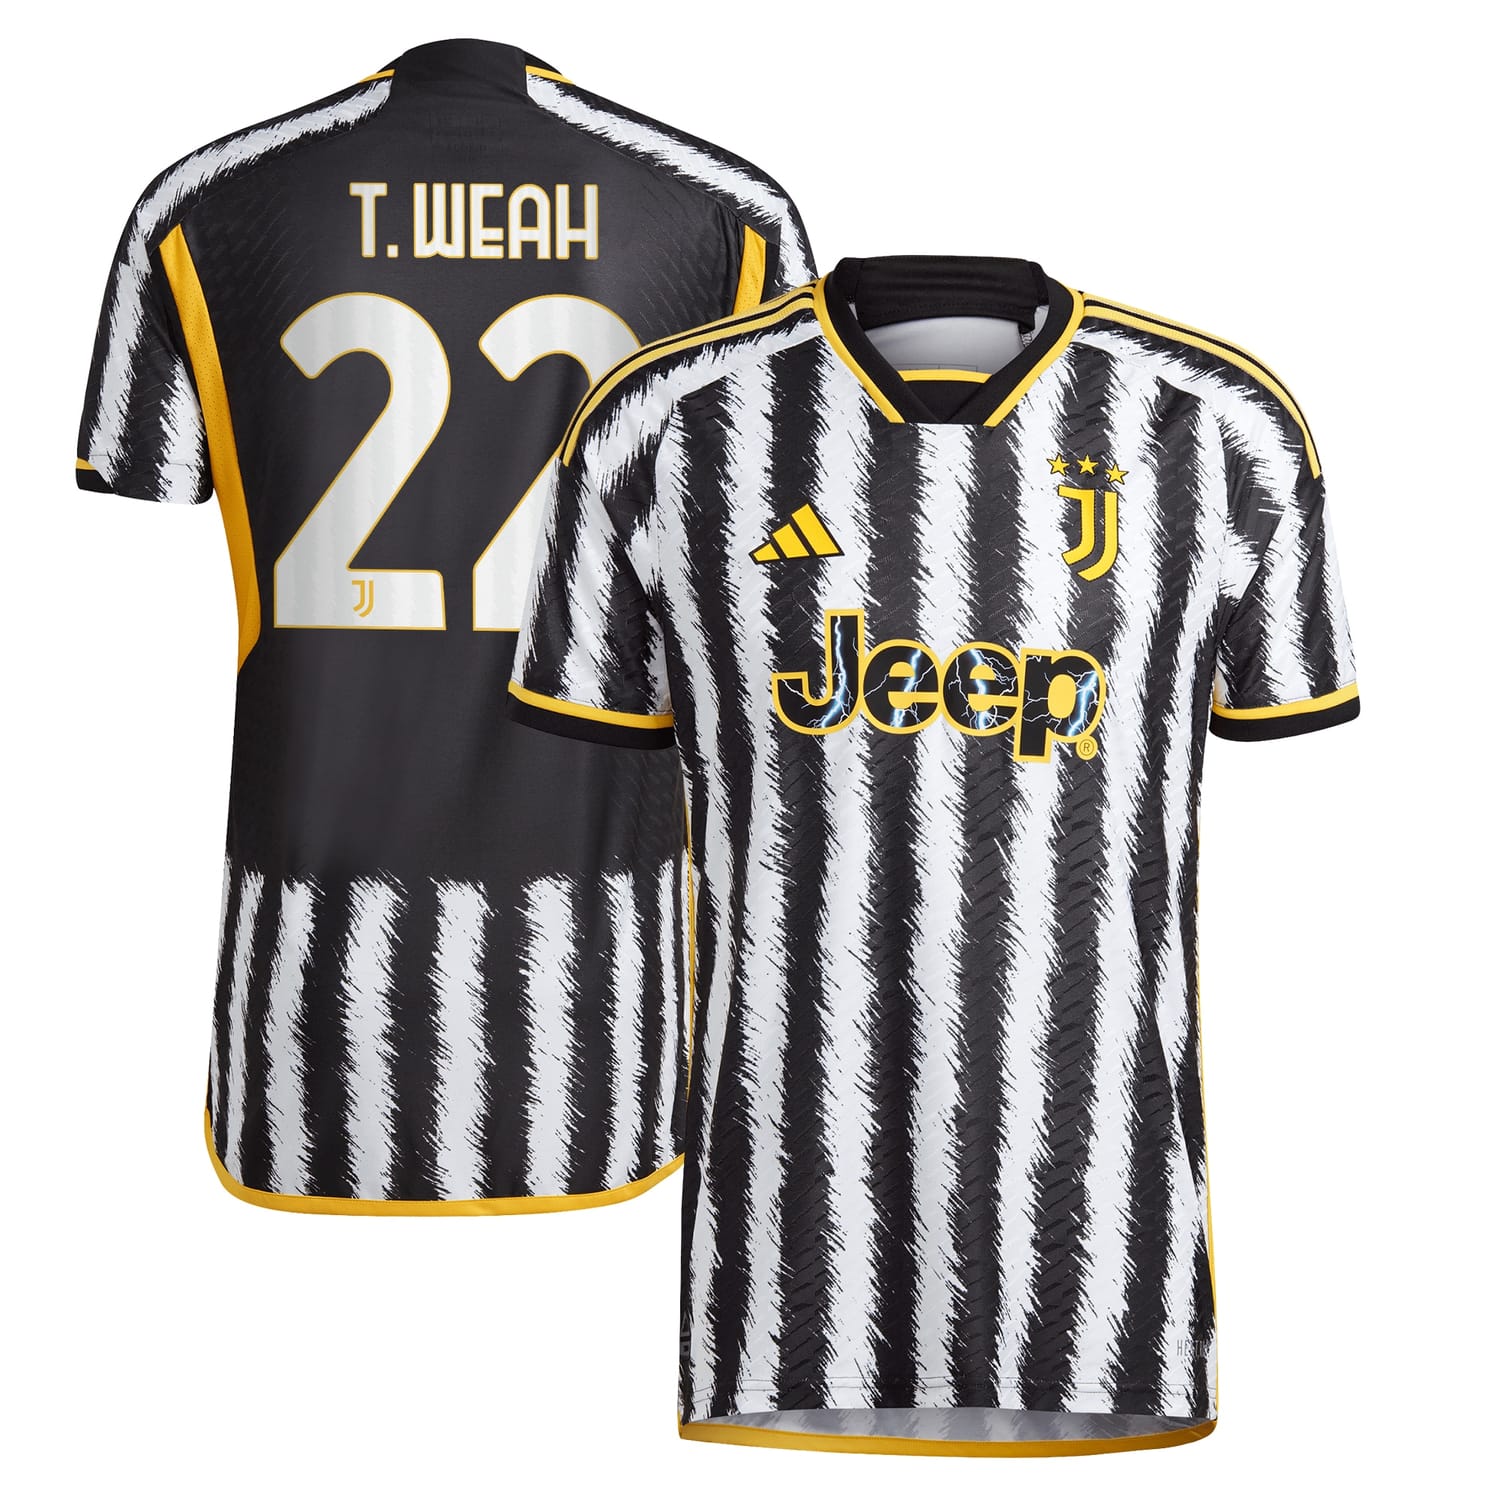 Serie A Juventus Home Authentic Jersey Shirt Black 2023-24 player Timothy Weah printing for Men